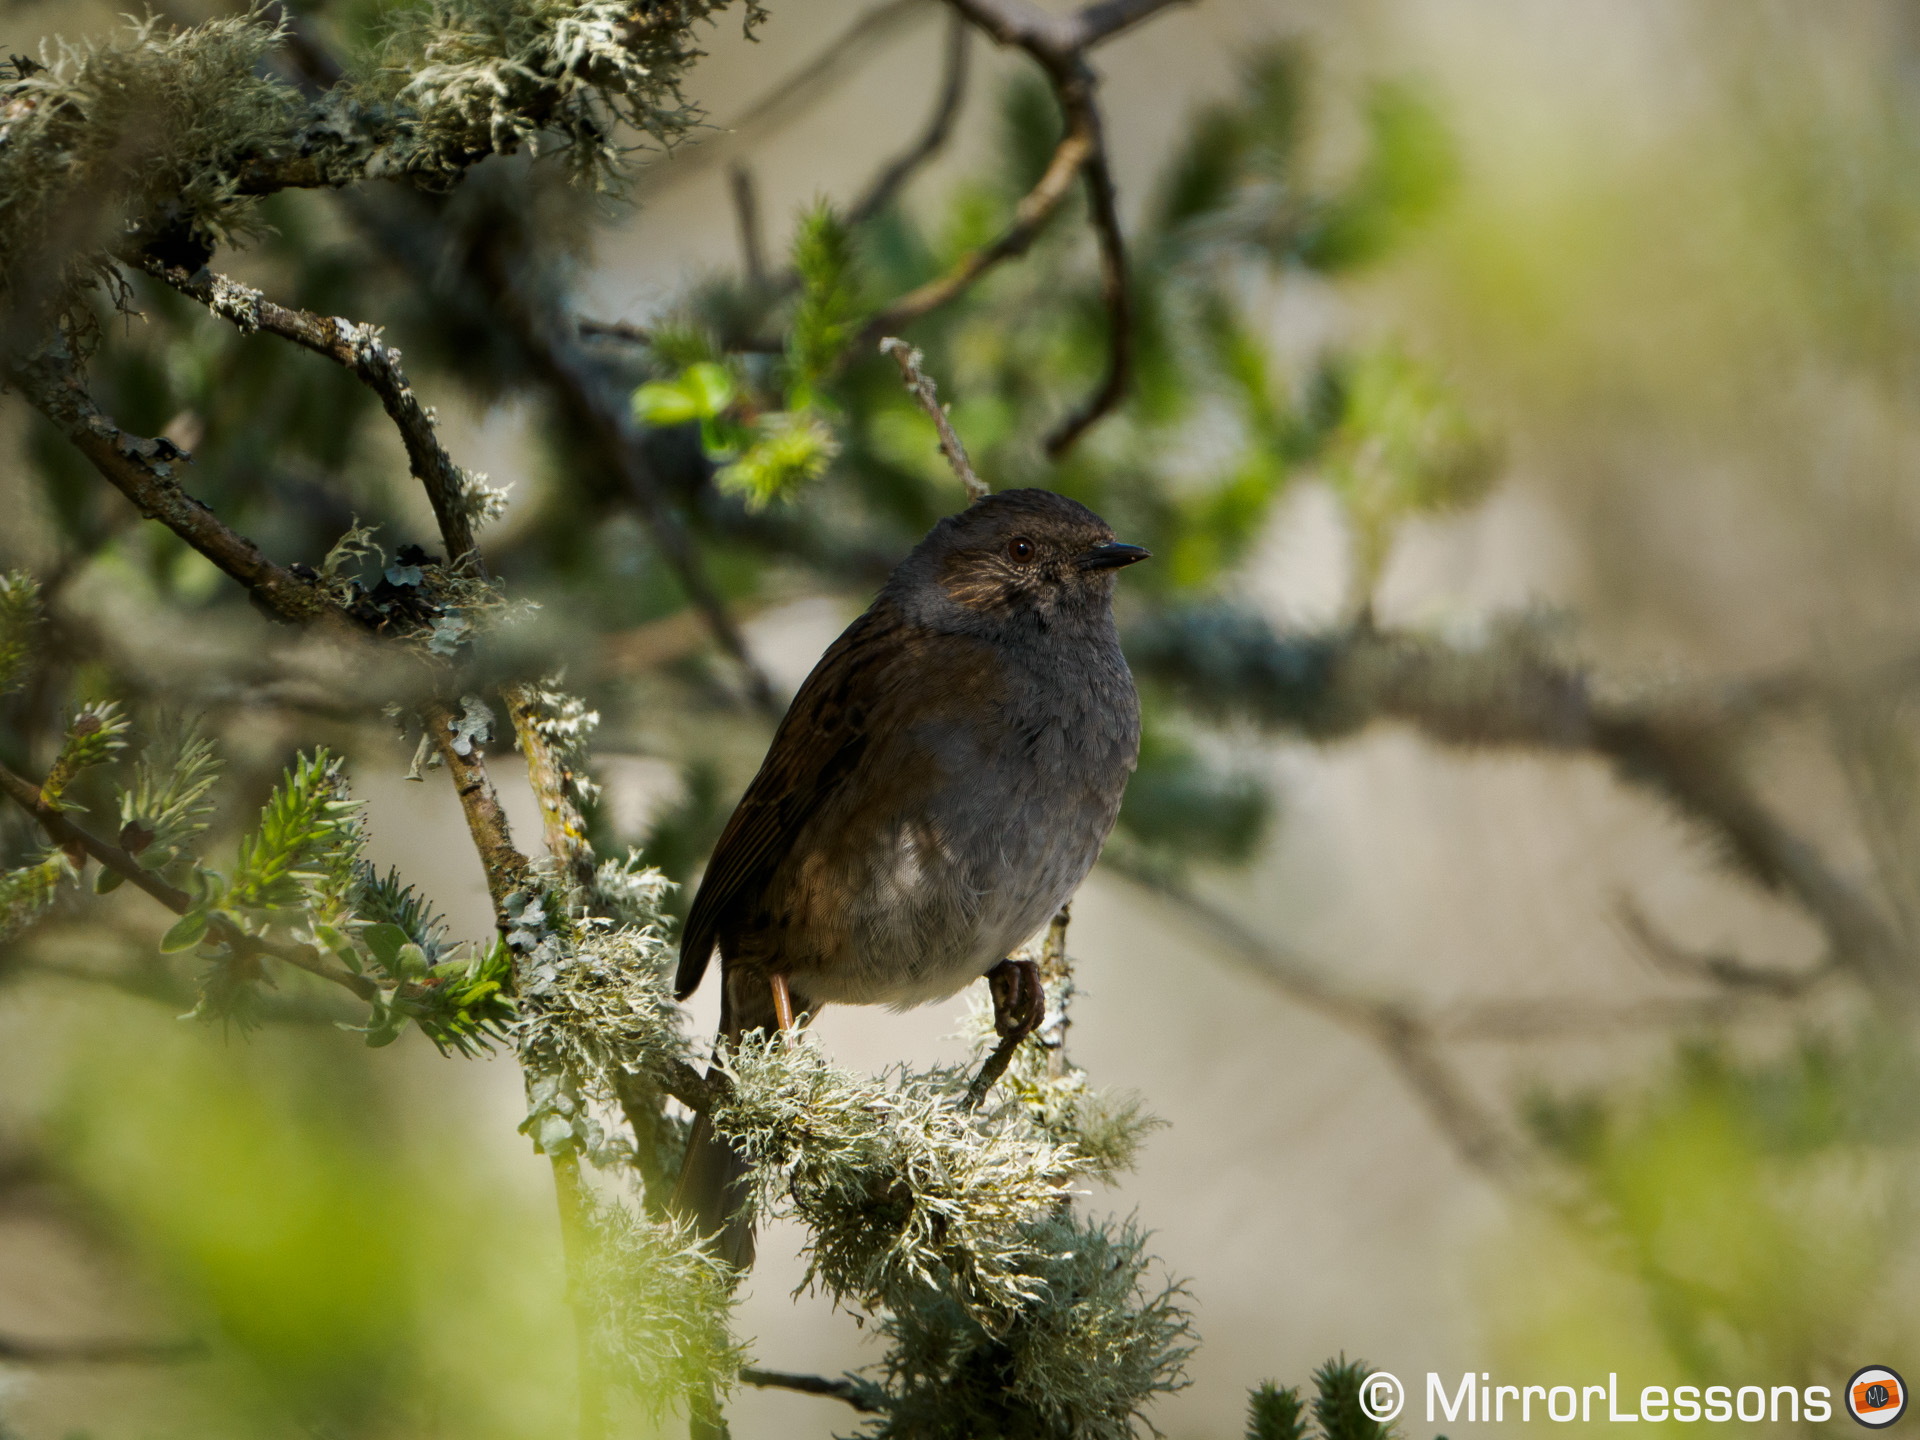 Dunnock perched in a tree